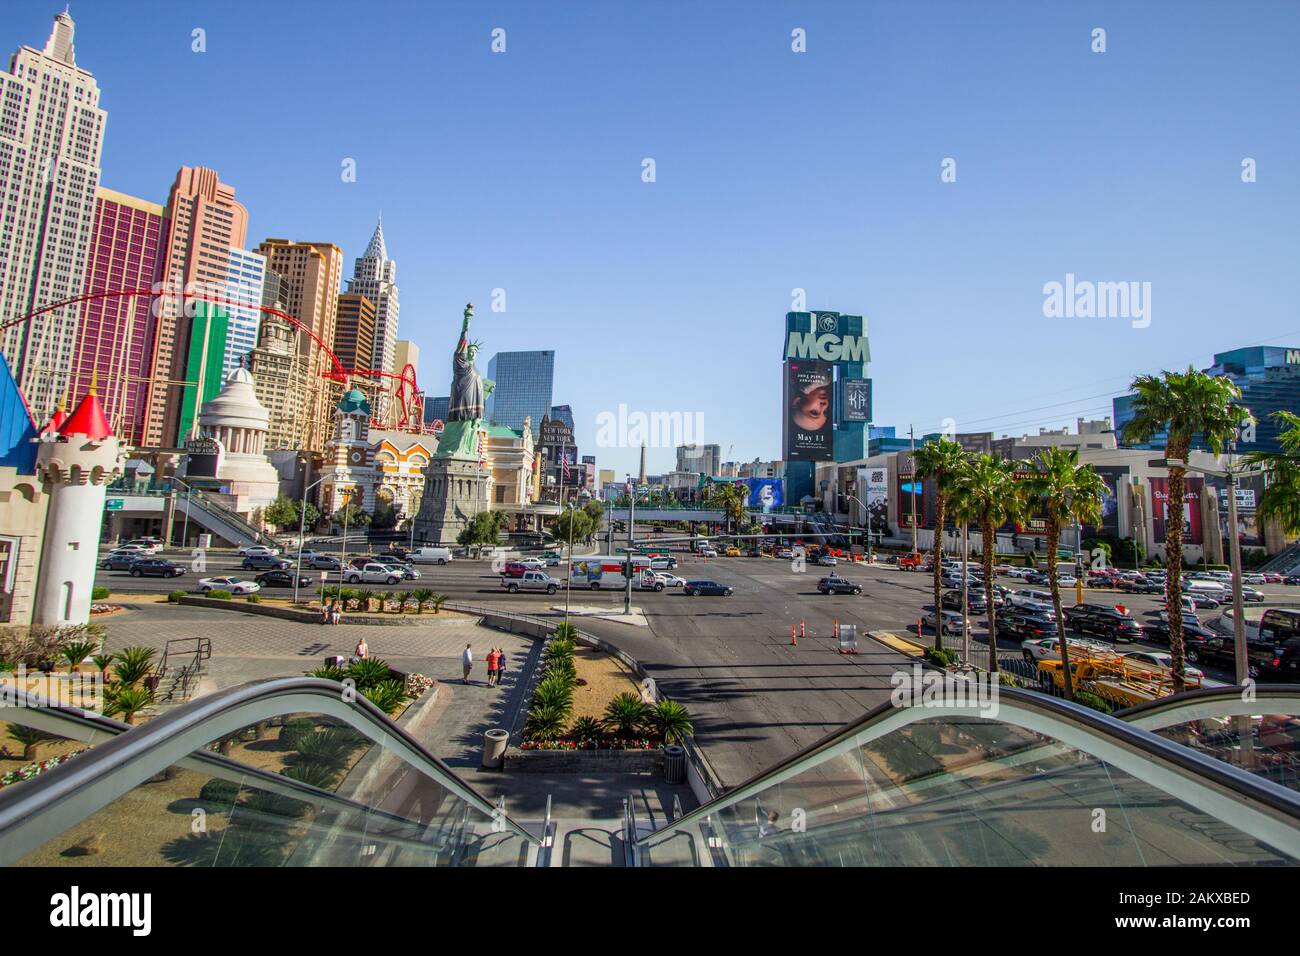 Las Vegas, Nevada, USA - Las Vegas Strip panoramic view of the Las Vegas Boulevard in the daytime and shot from above with pedestrians and tourist. Stock Photo